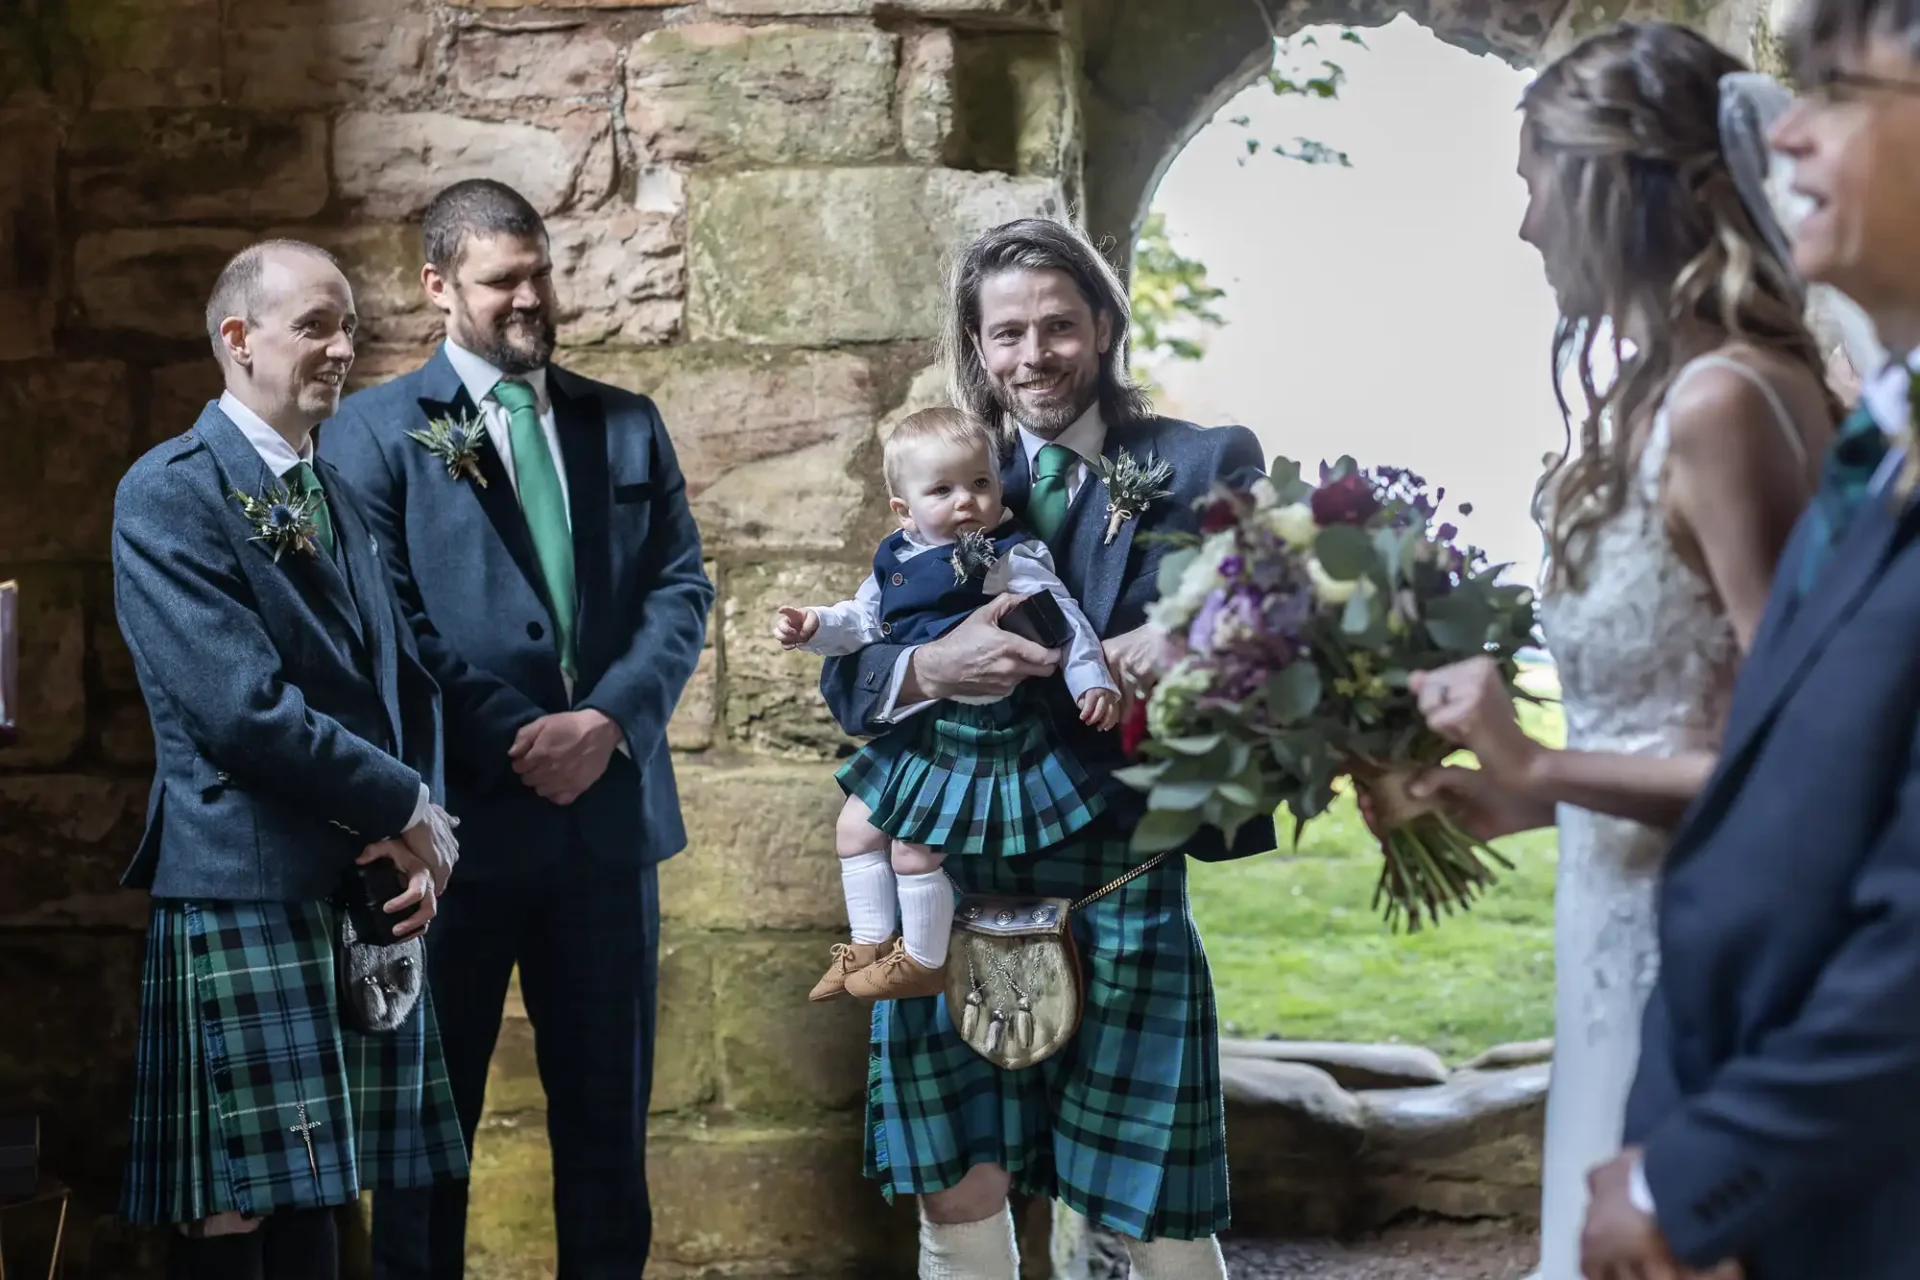 A wedding ceremony where three men in kilts, one holding a toddler, are standing beside a woman in a white dress holding a bouquet. They are inside a stone building with an archway.